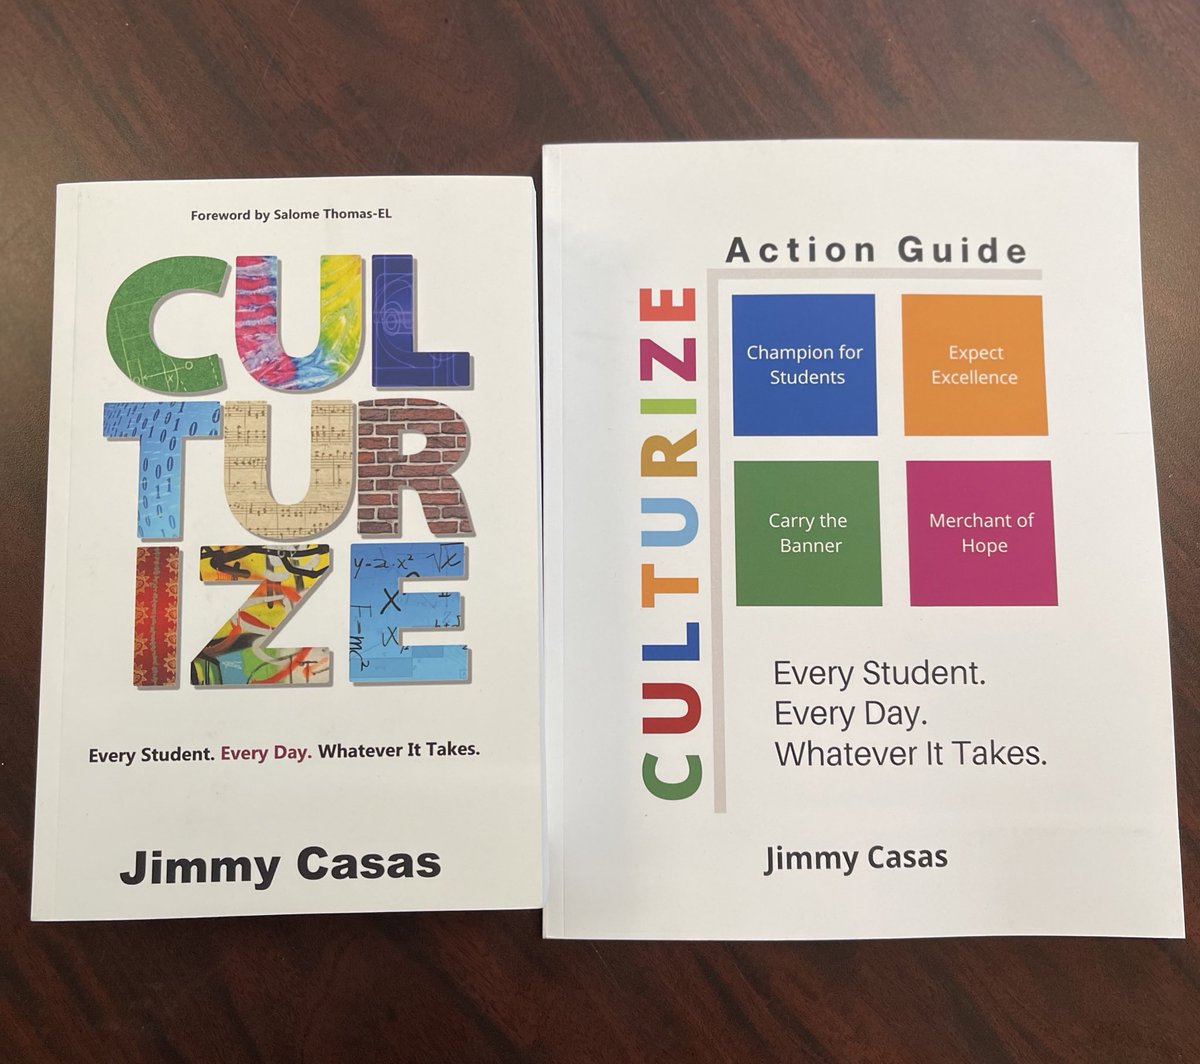 We may not get to decide which kids to serve, but we do get to decide the kind of climate in which we want to serve them. ~@casas_jimmy Culturize is our Leadership Crew’s summer read.
#FPErising